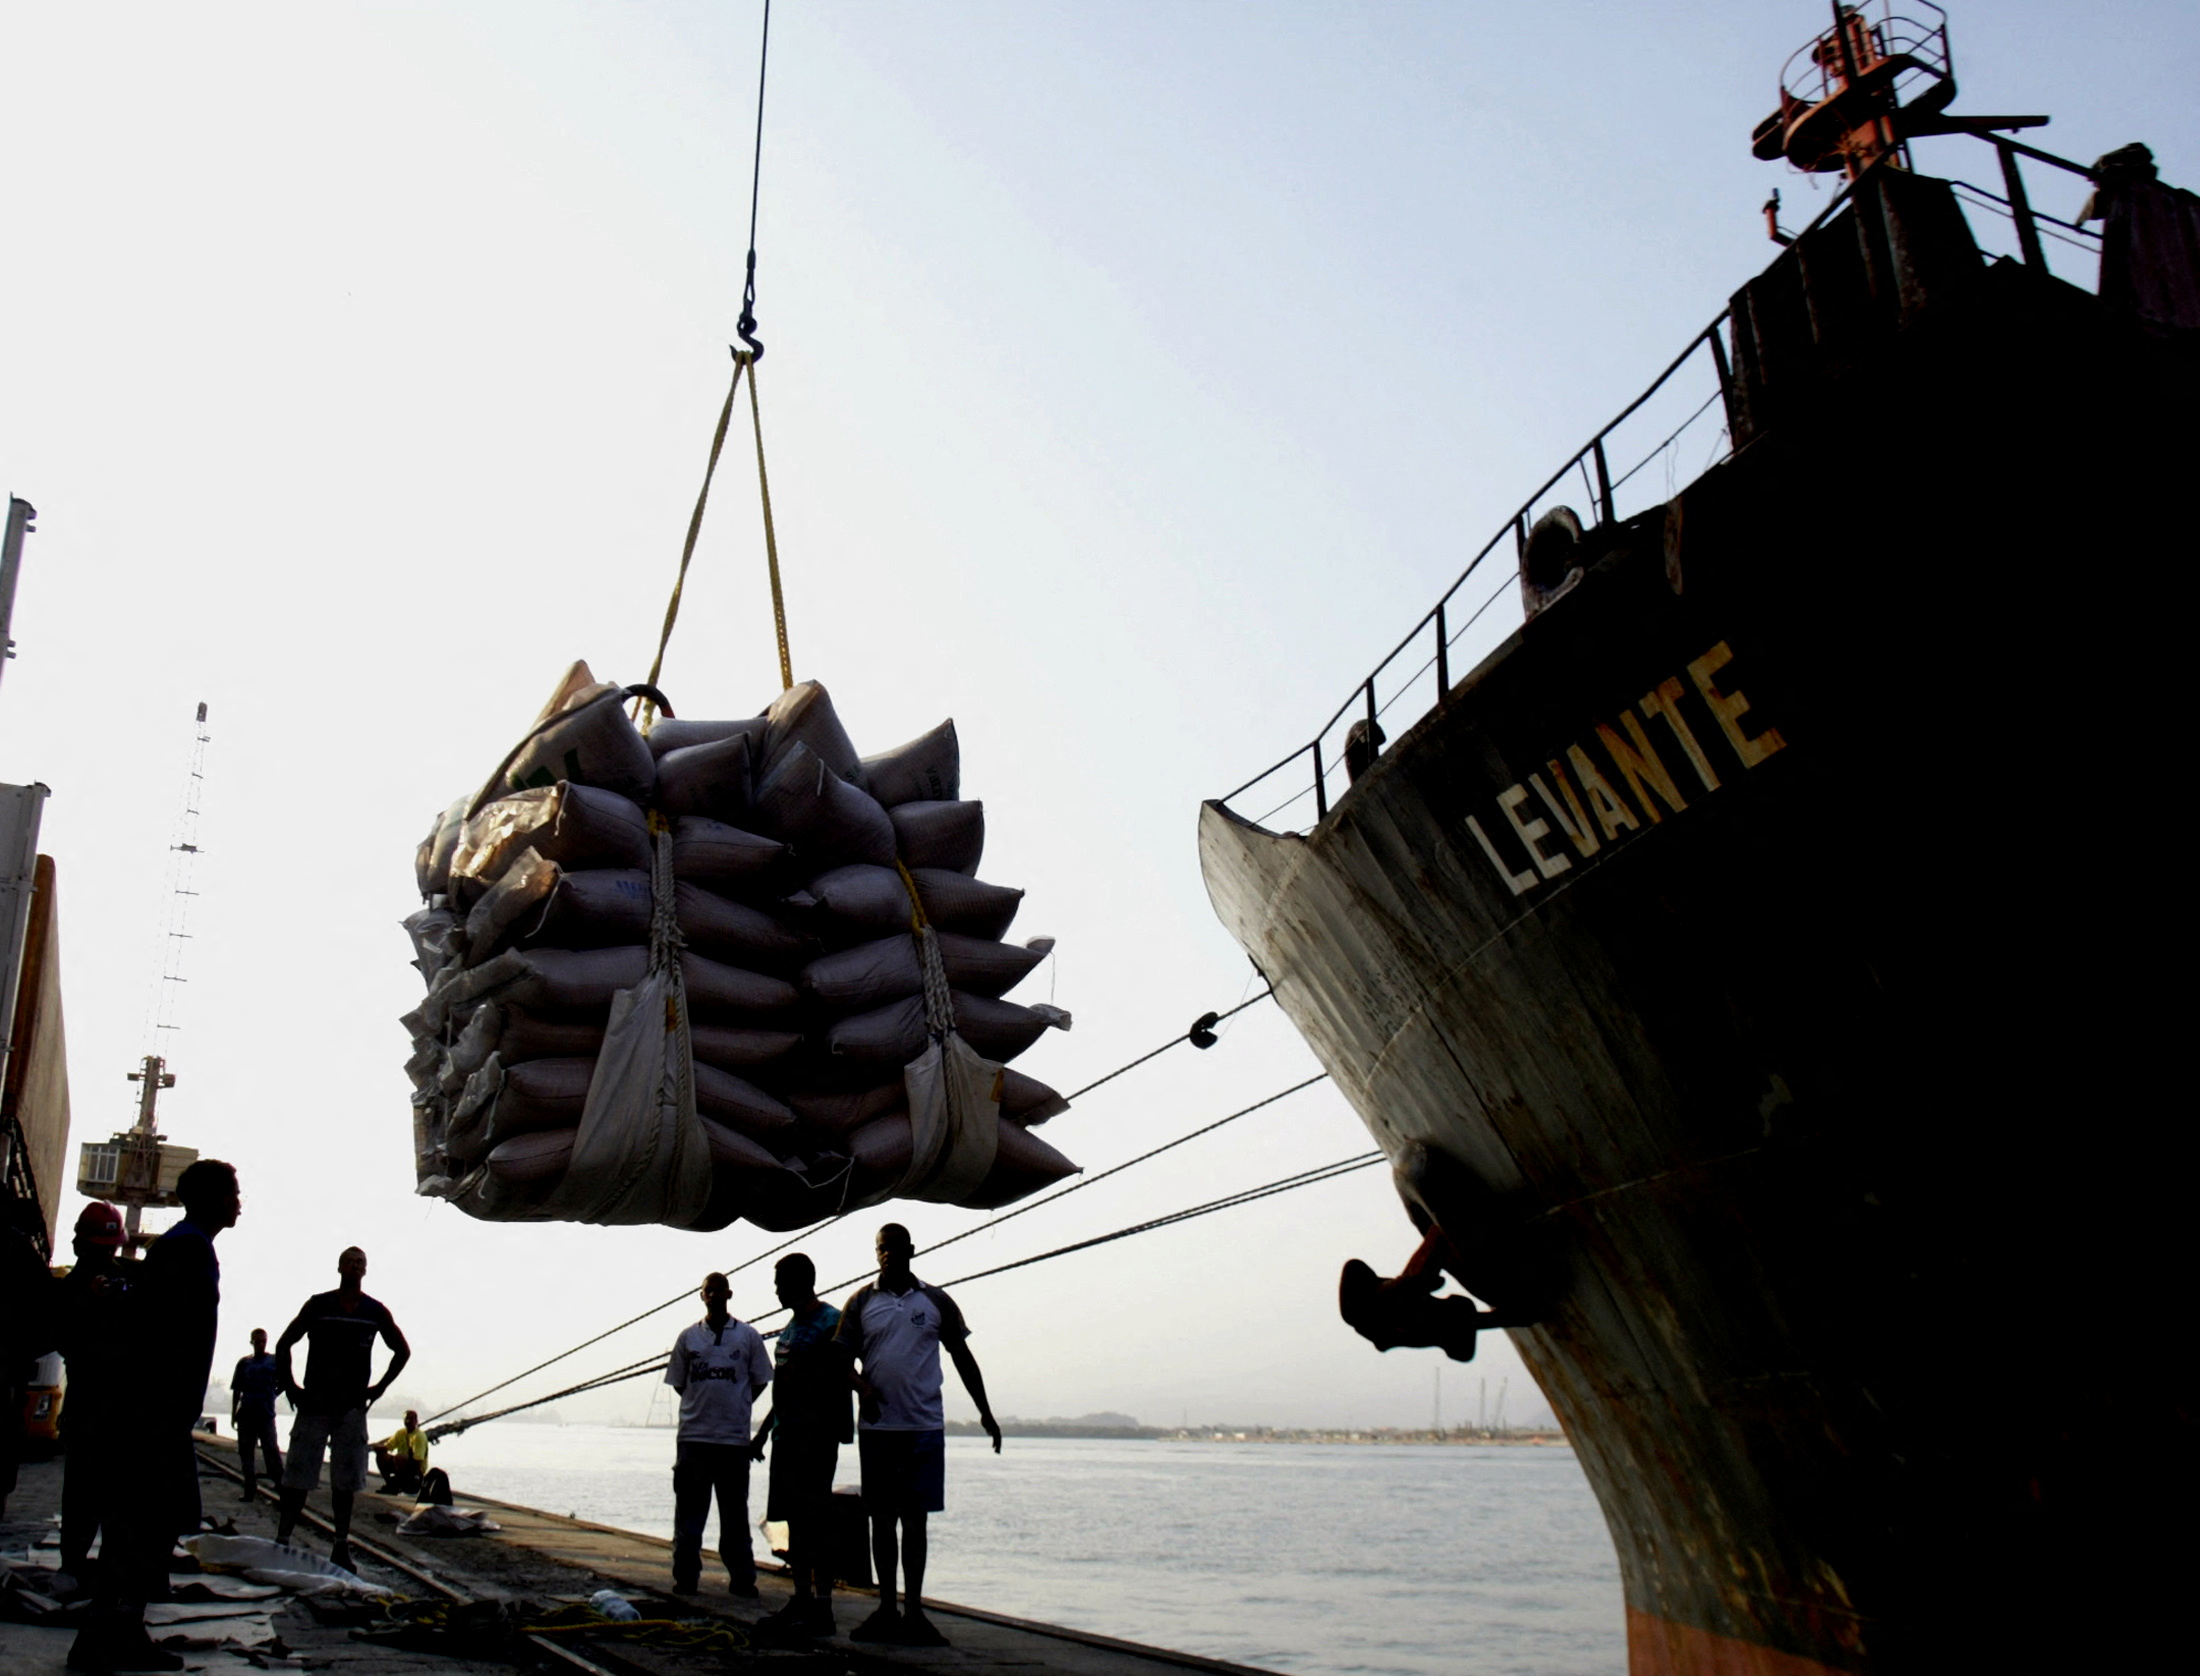 A ship is loaded with sugar sacks on the docks at port of Santos.